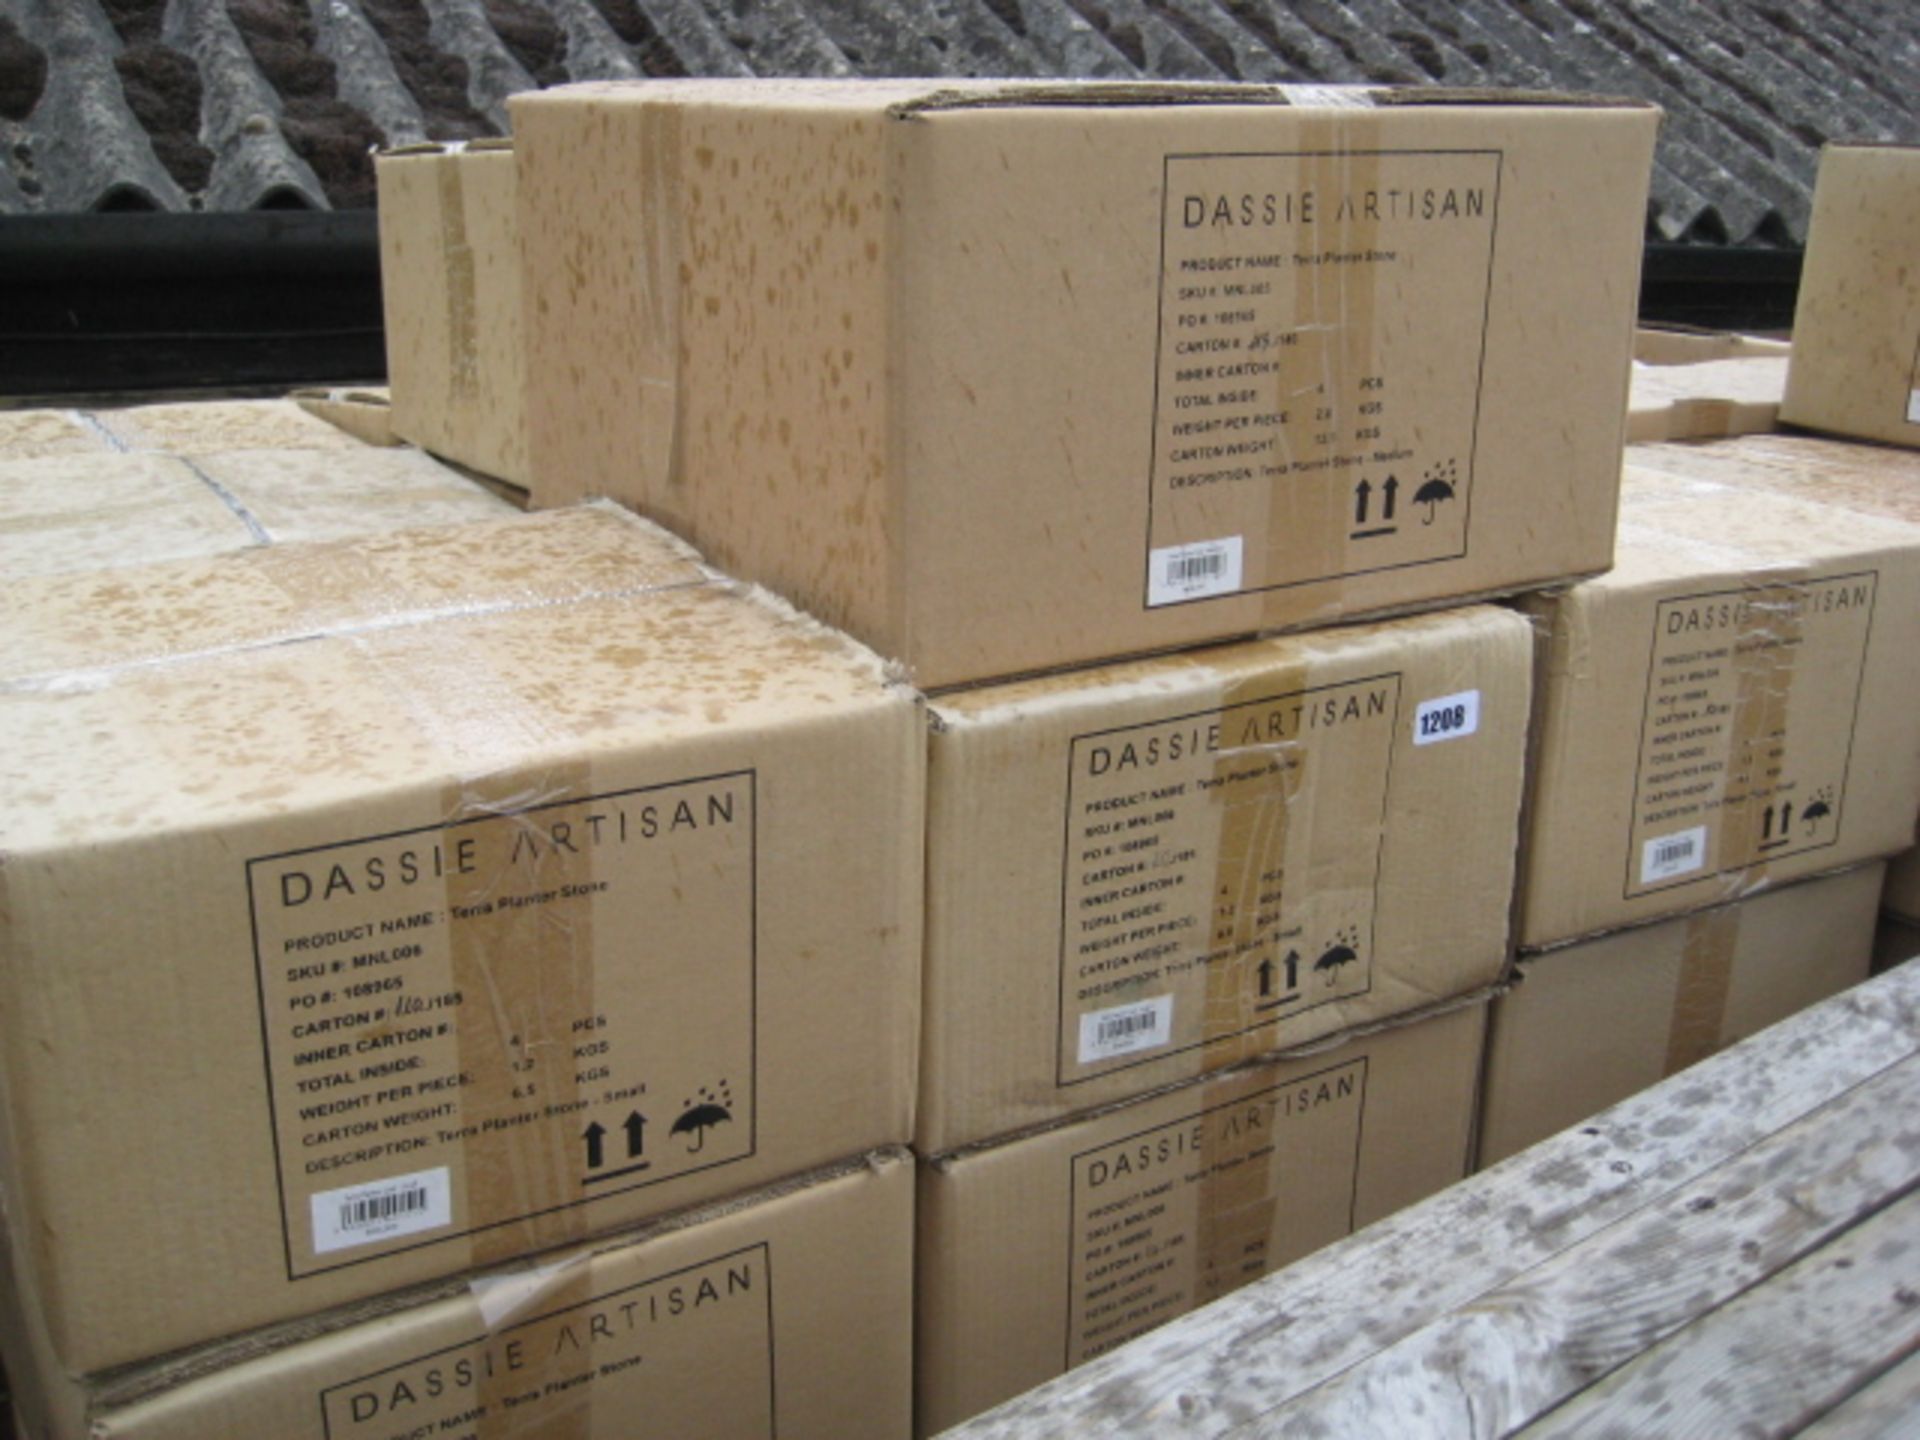 Pallet containing approx. 40 boxes of Dassie Artisan terracotta planters, size S and M